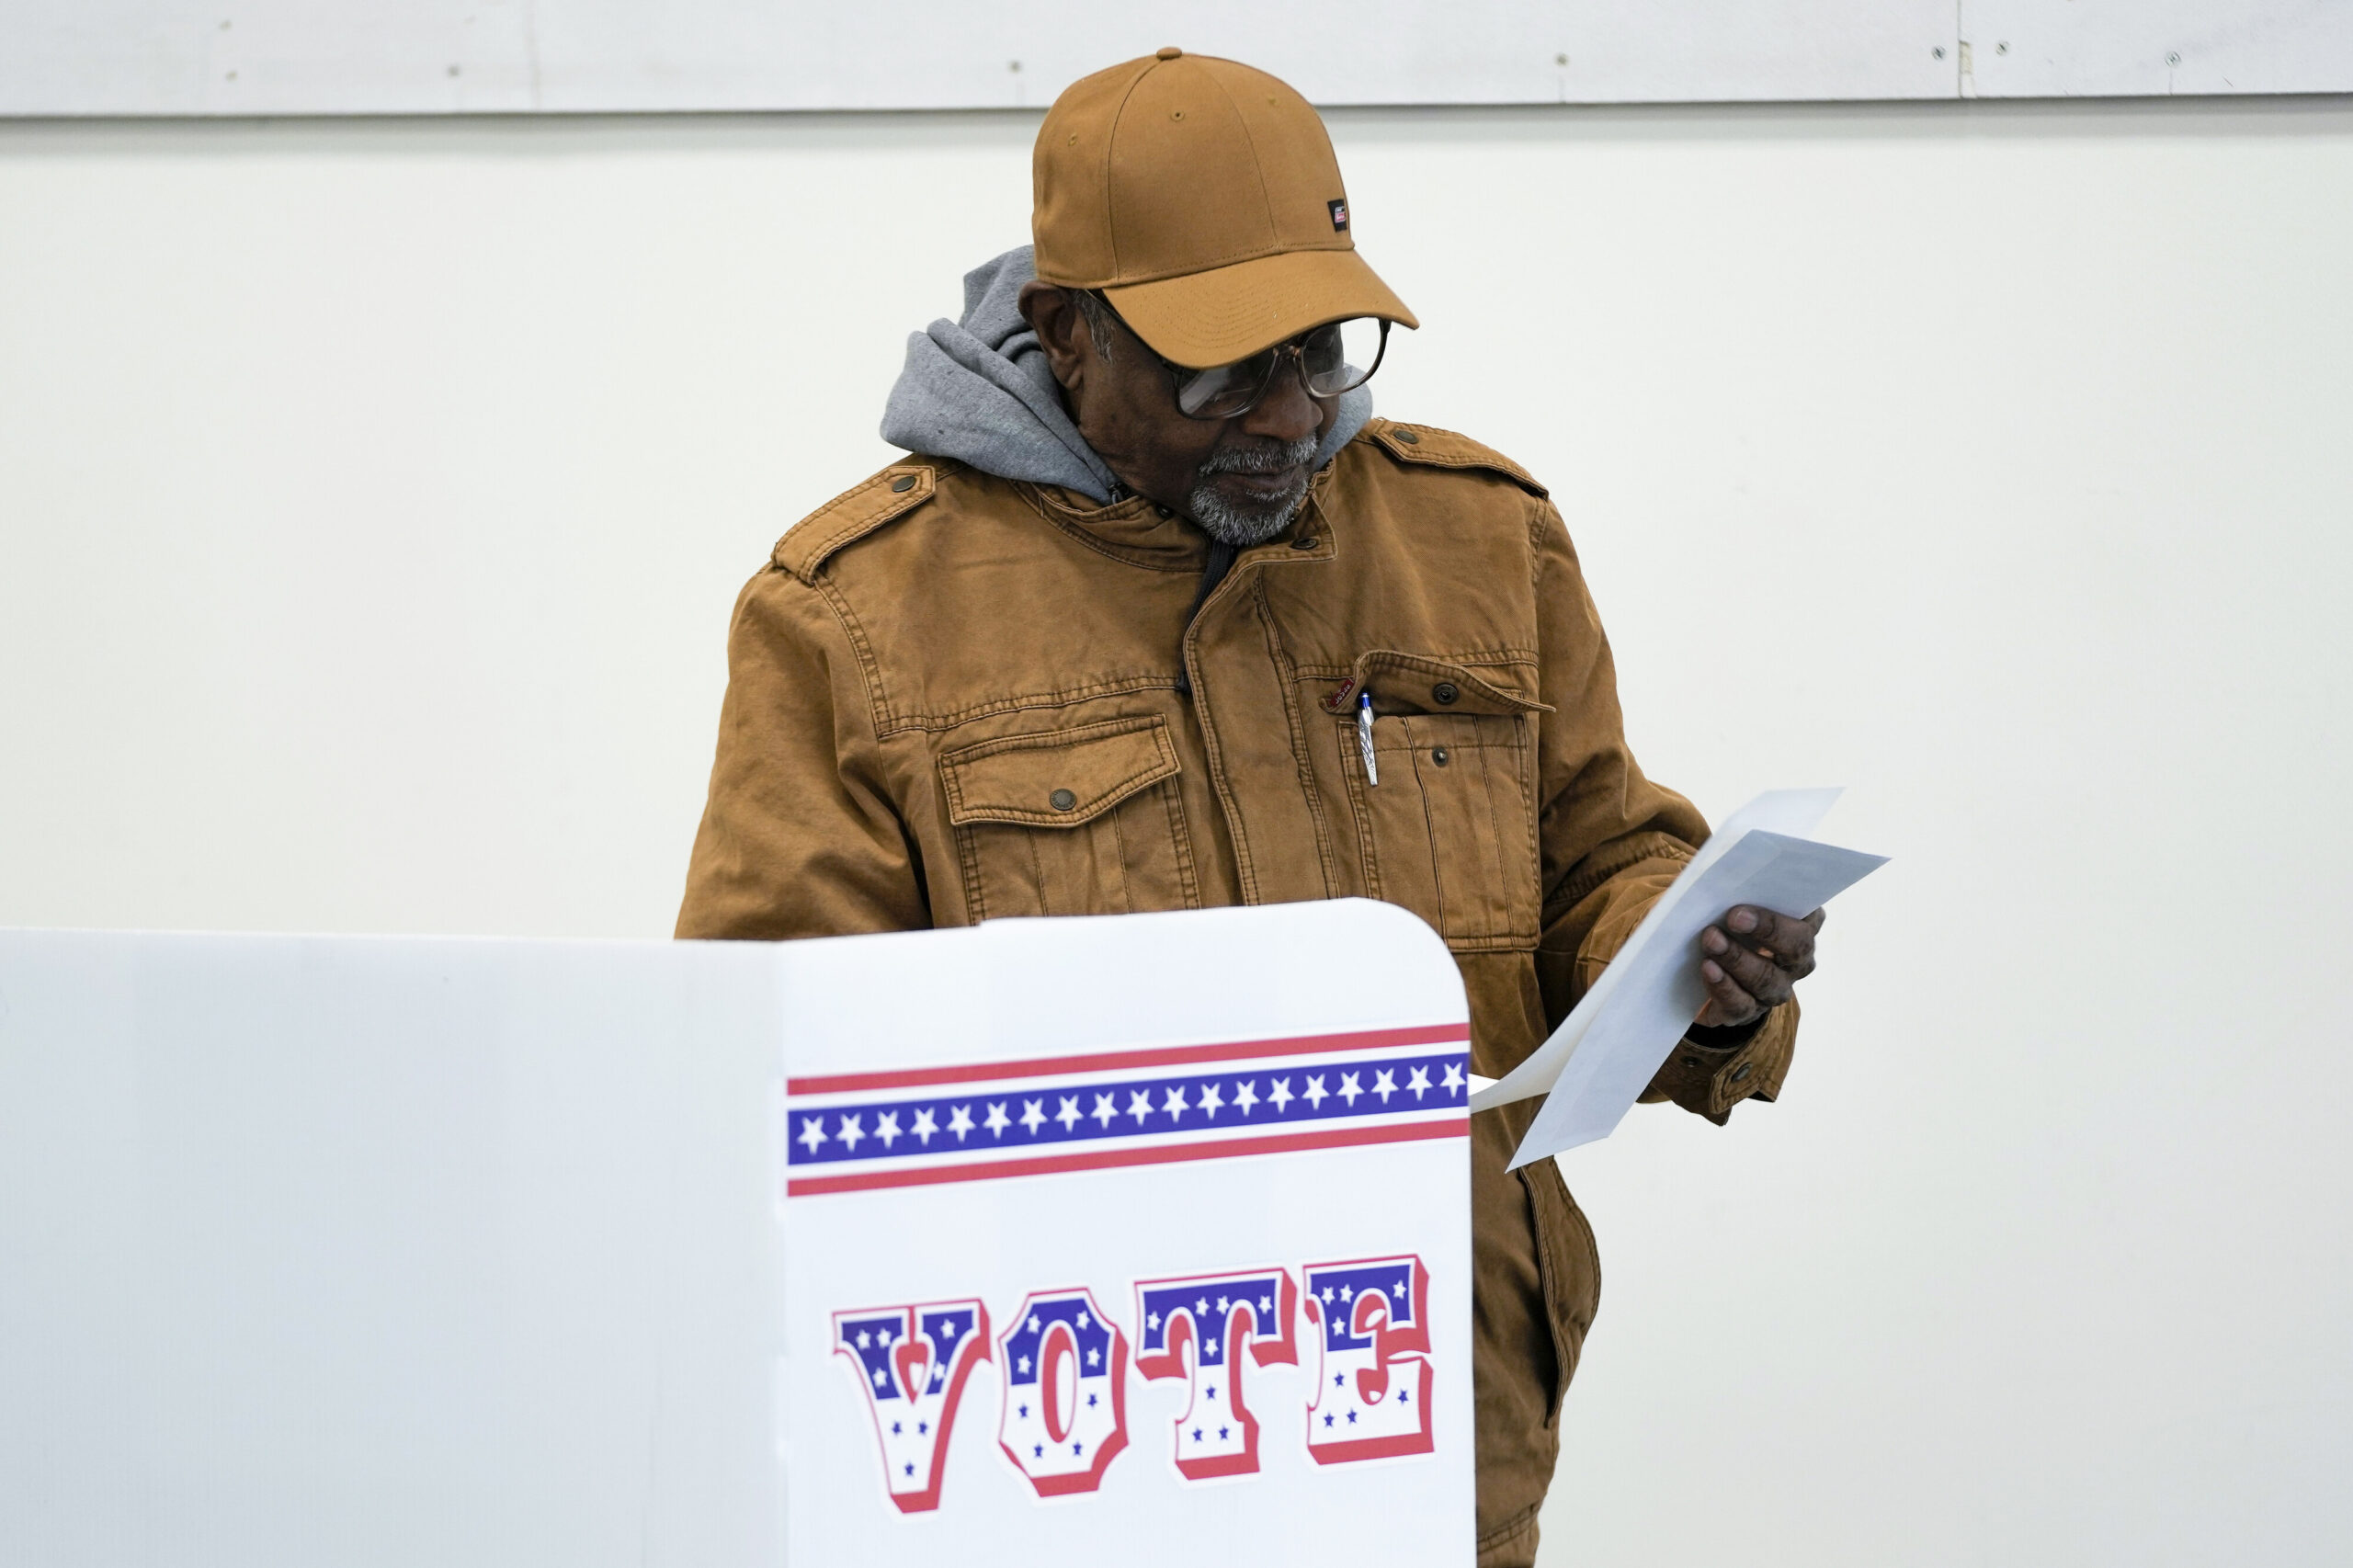 A person filling out an election ballot